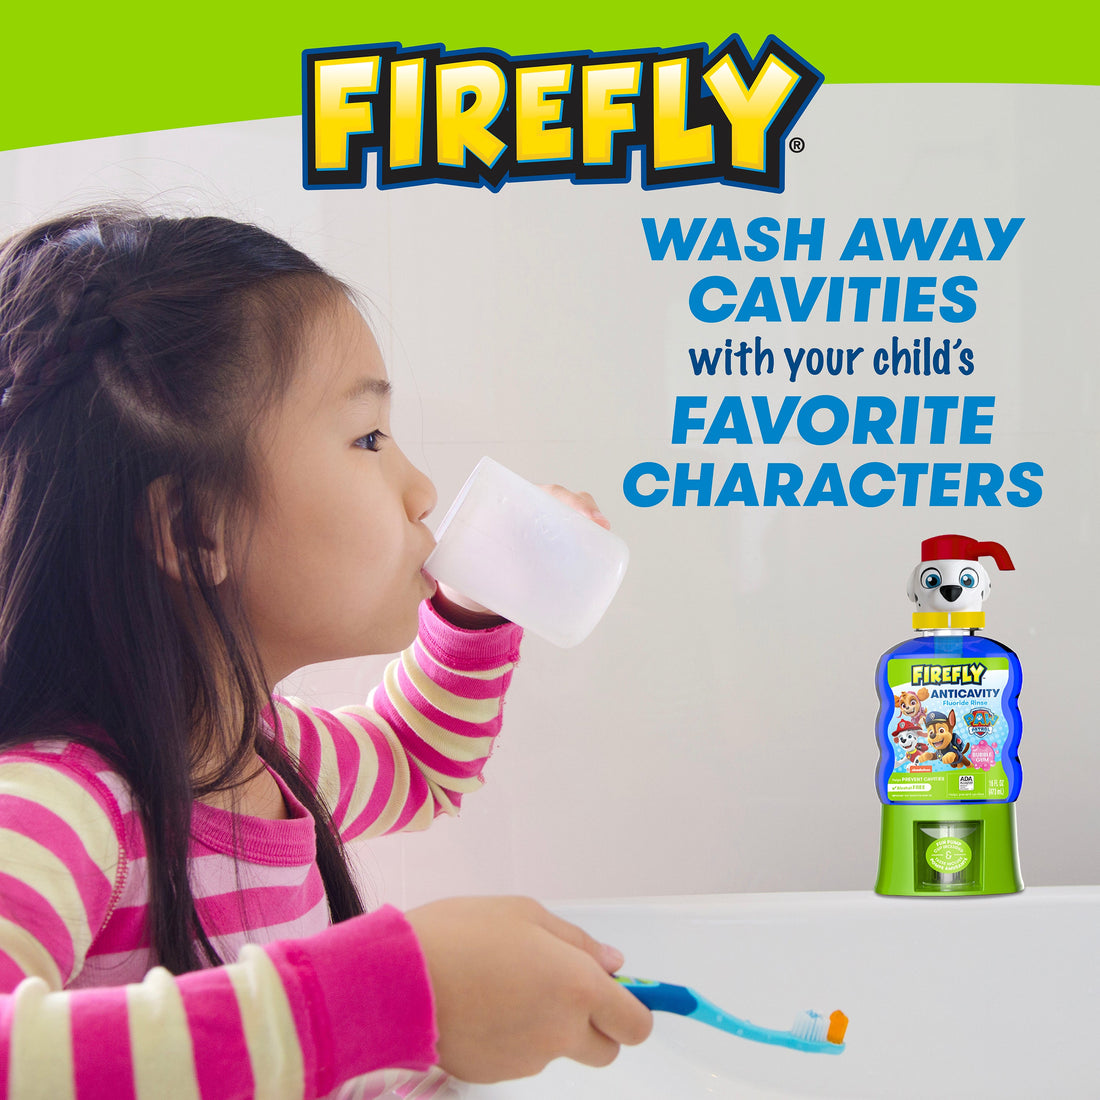 Child sipping a cup at the sink holding Firefly Toothbrush, Wash away cavities with your child&